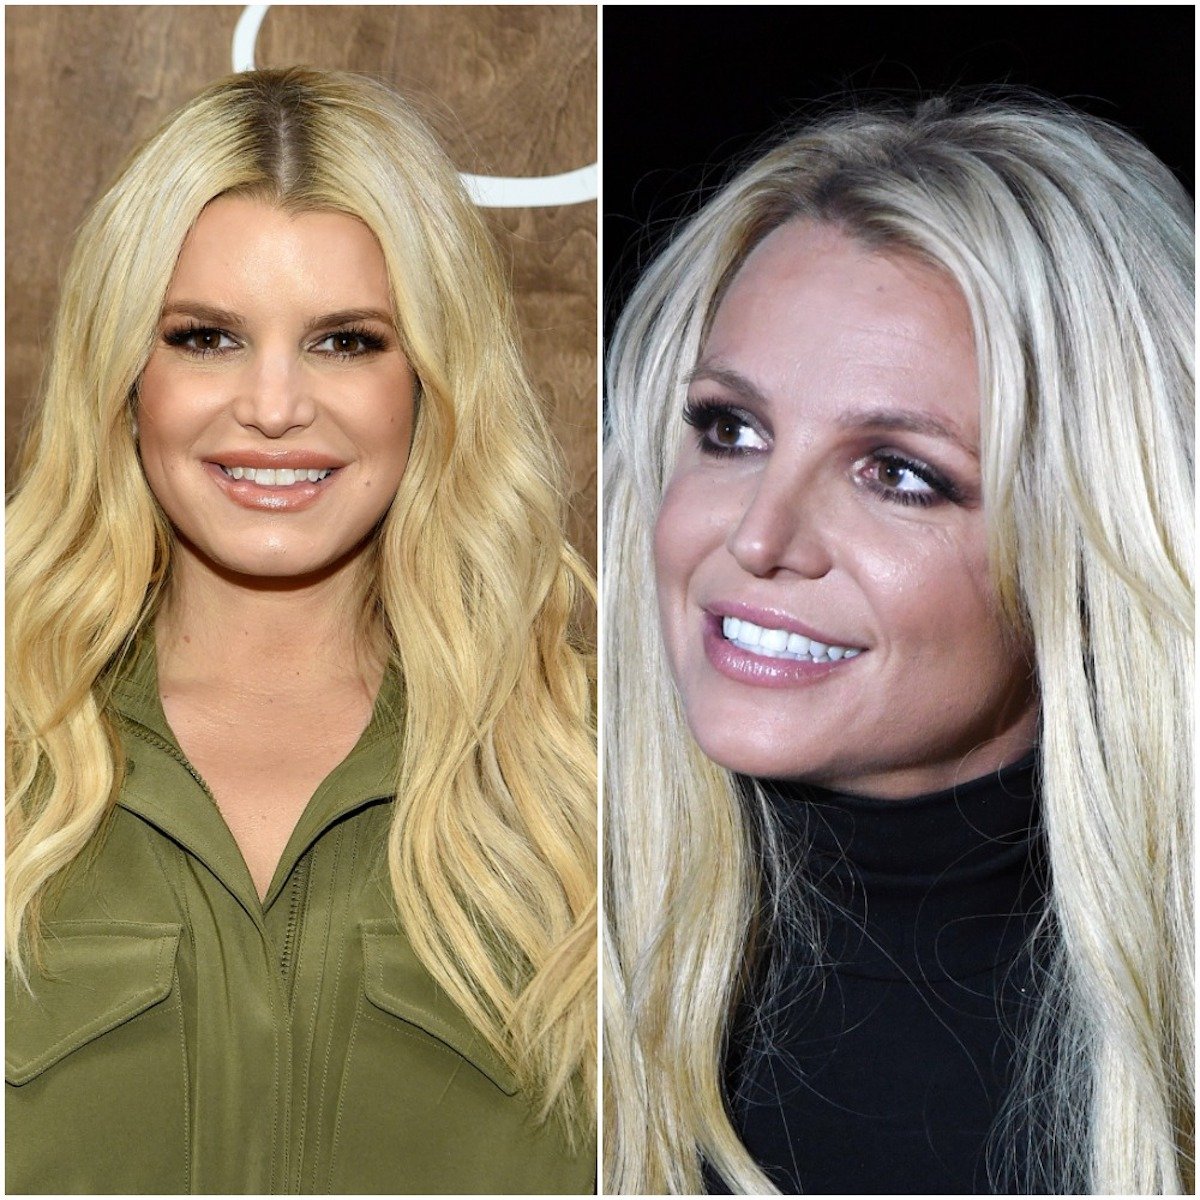 Why Jessica Simpson Refuses to Watch 'Framing Britney Spears